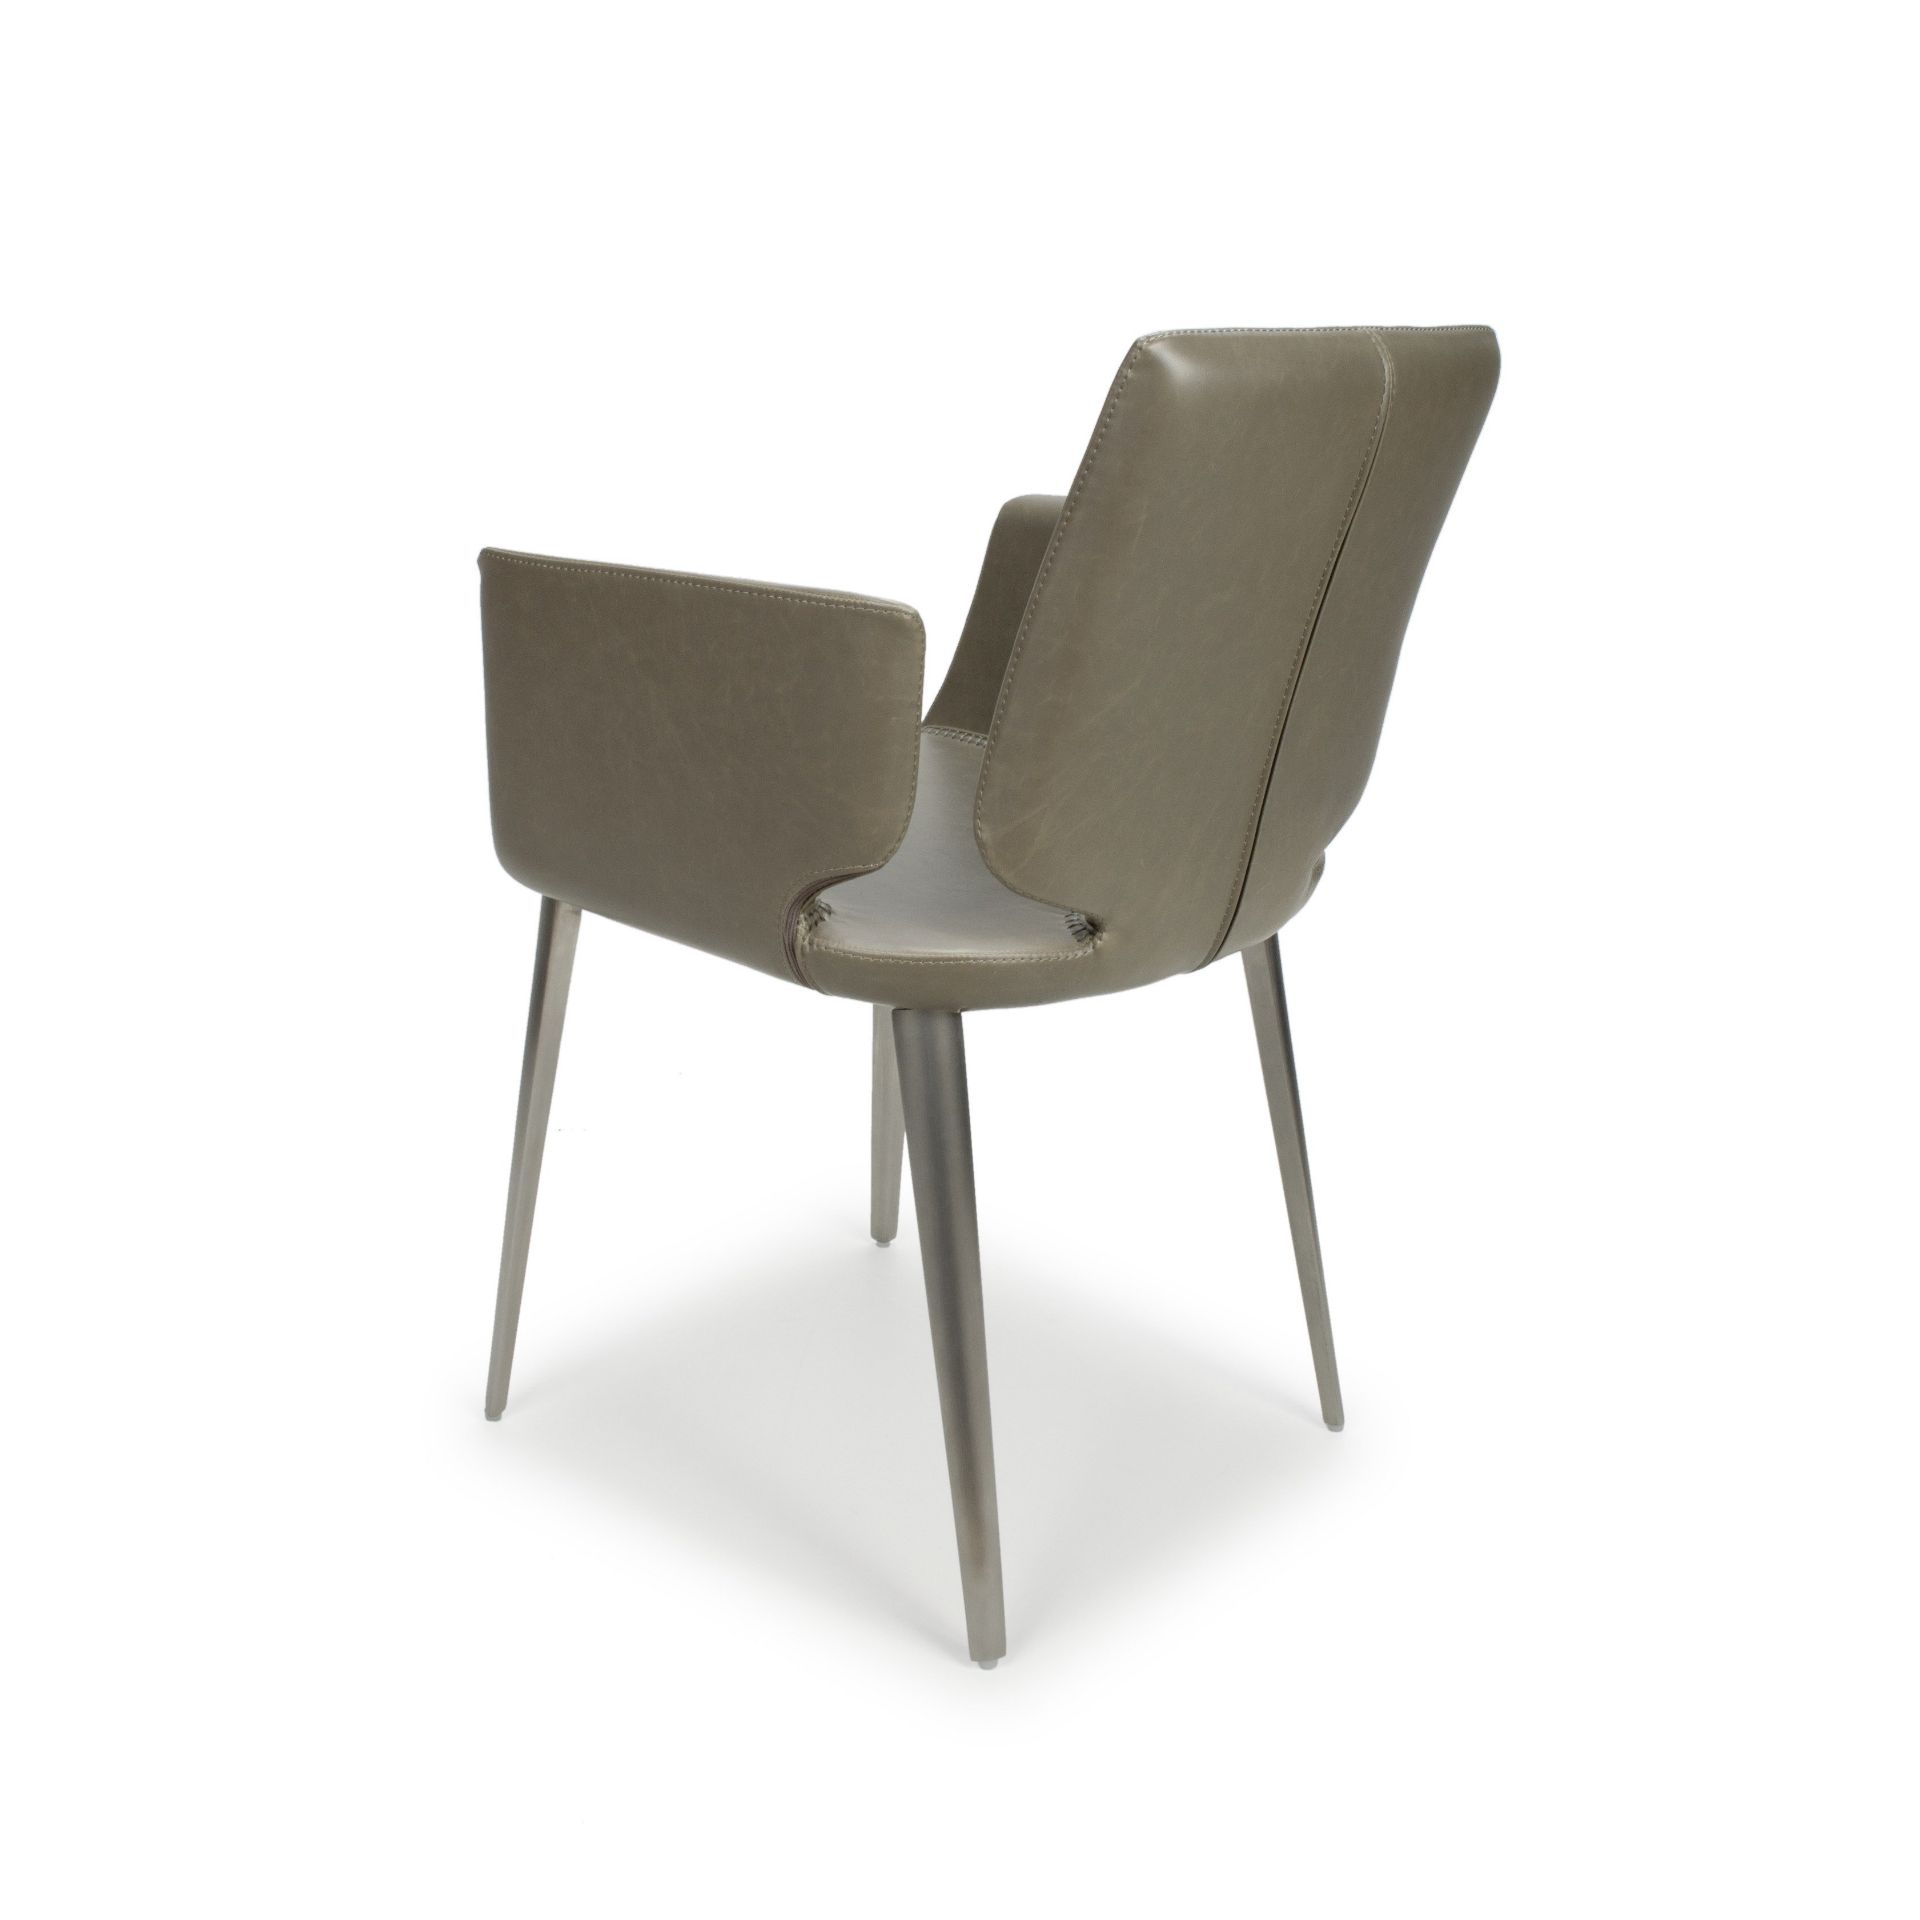 Harvard Grey Faux Leather and Steel Modern Carver Dining Chair - Image 3 of 4